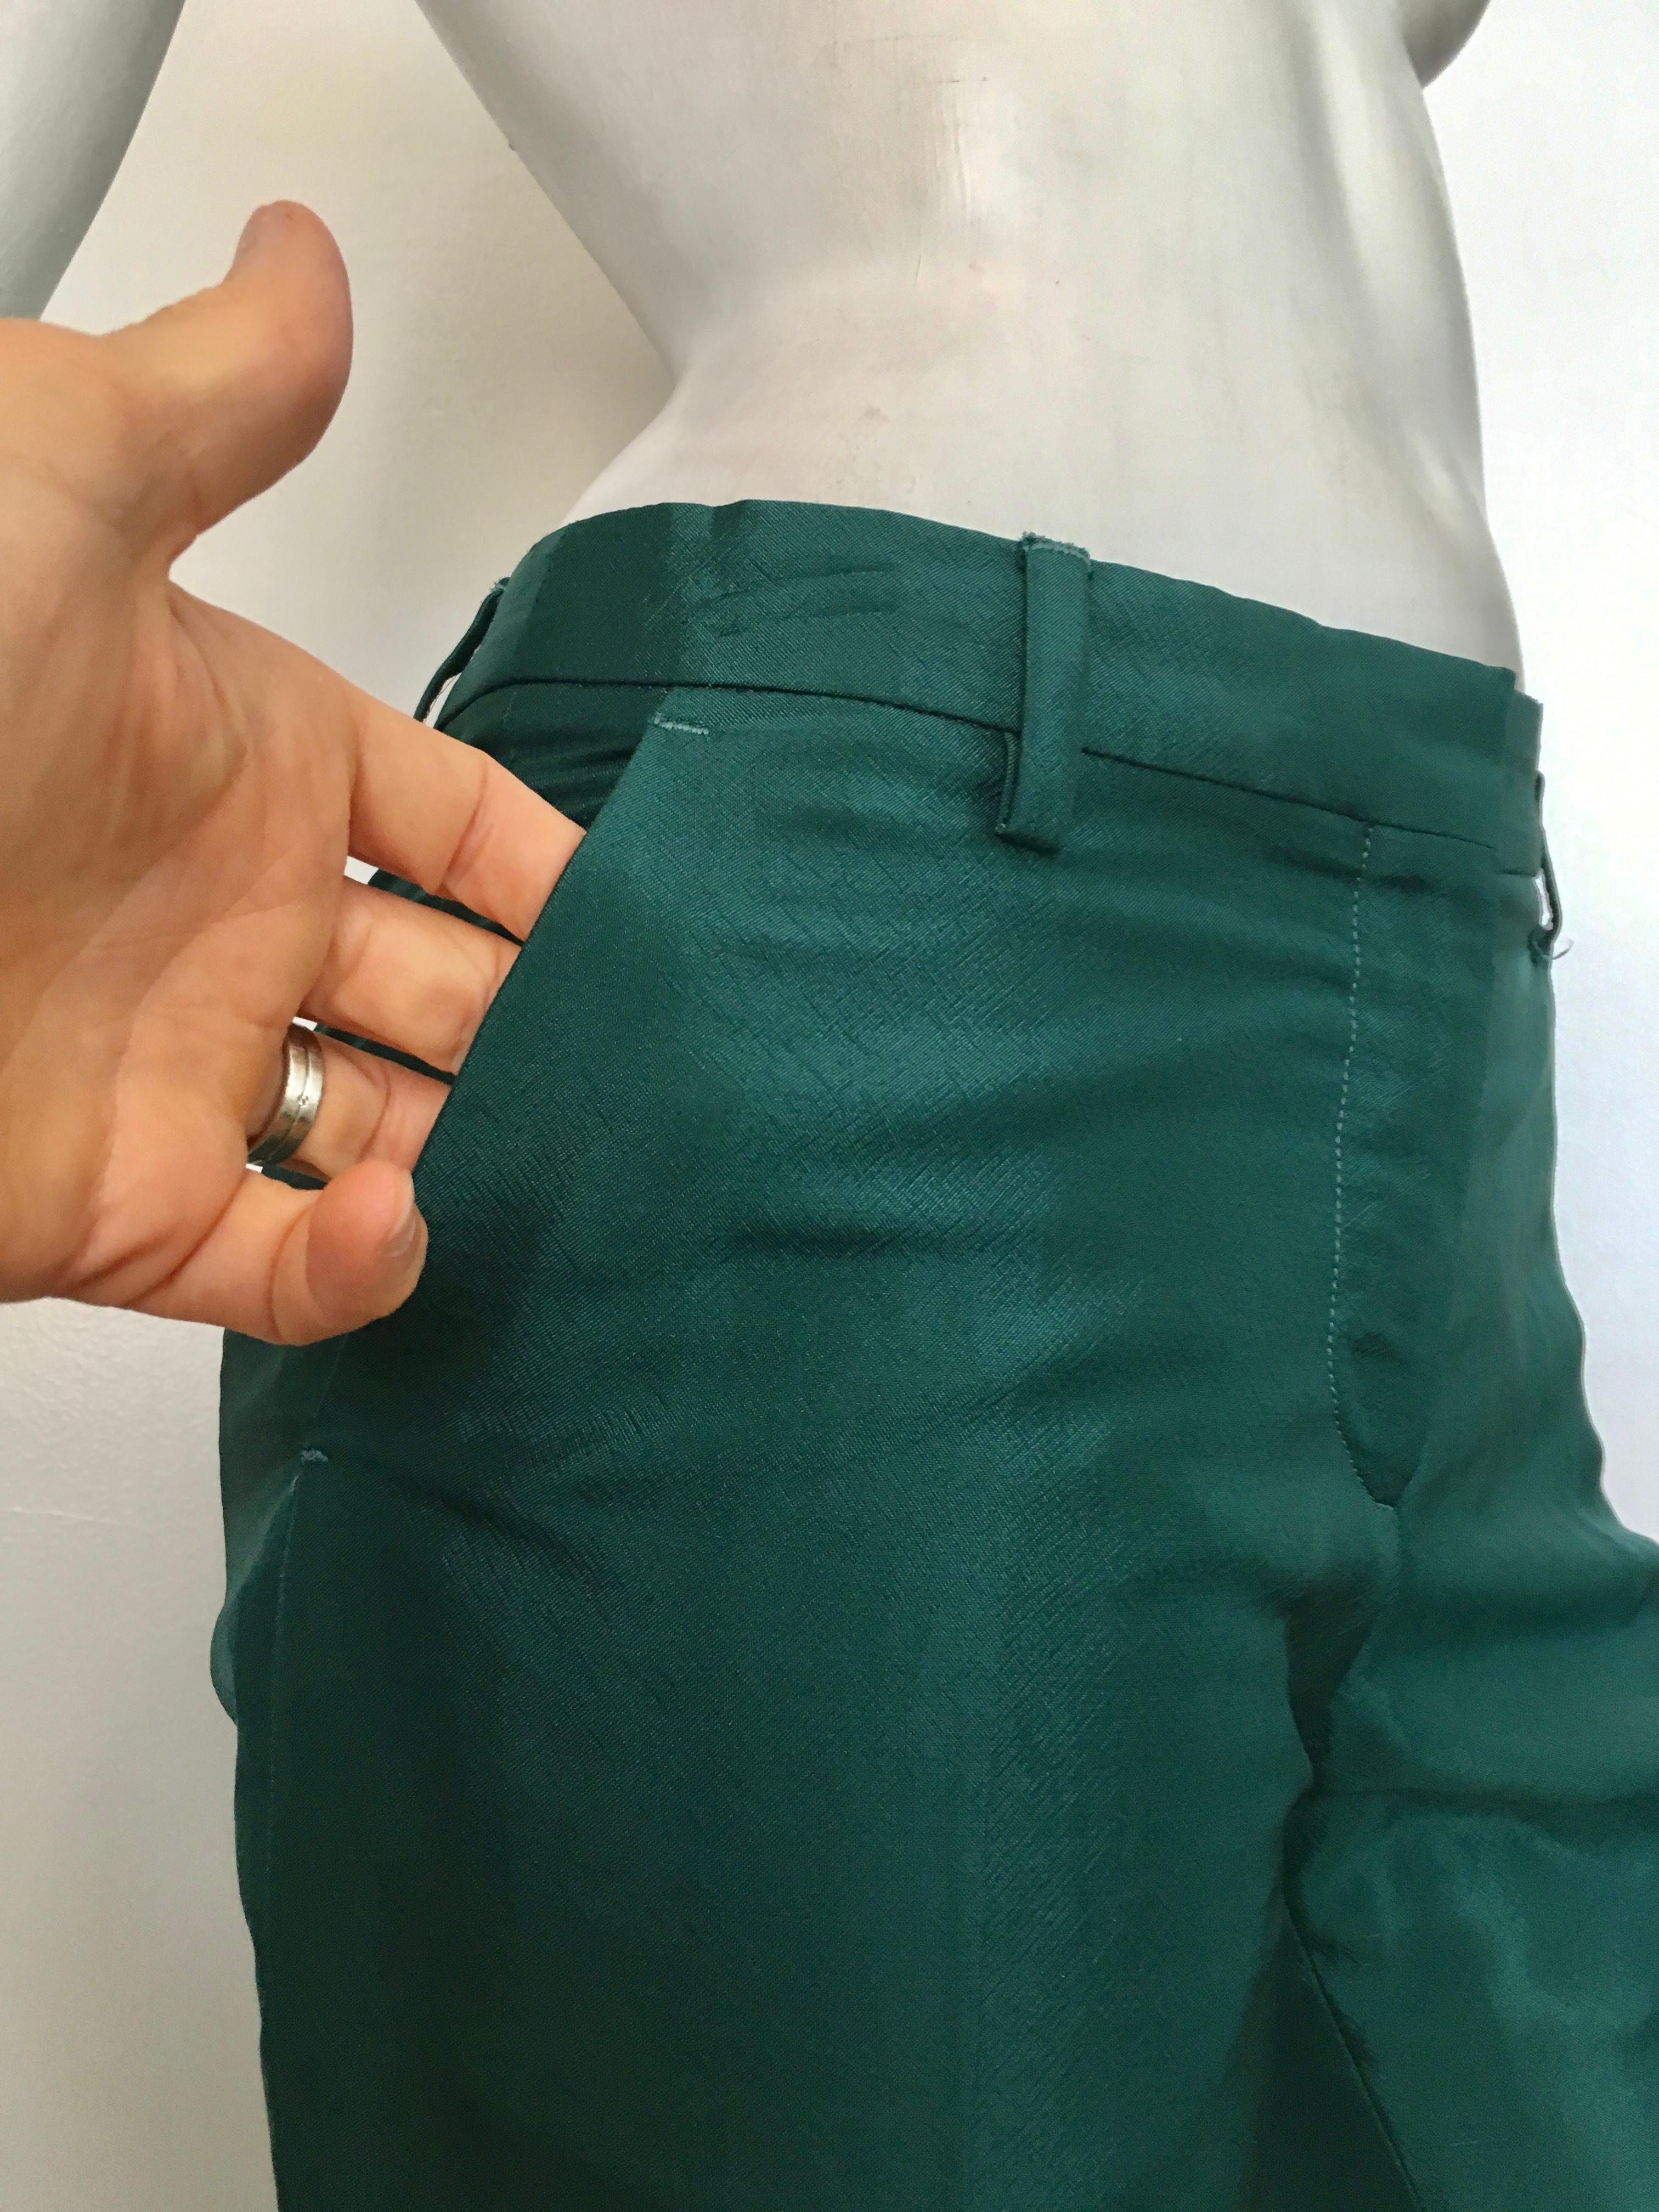 Dries Van Noten Green Dress Pants with Pockets Size 4 / 34. For Sale 1